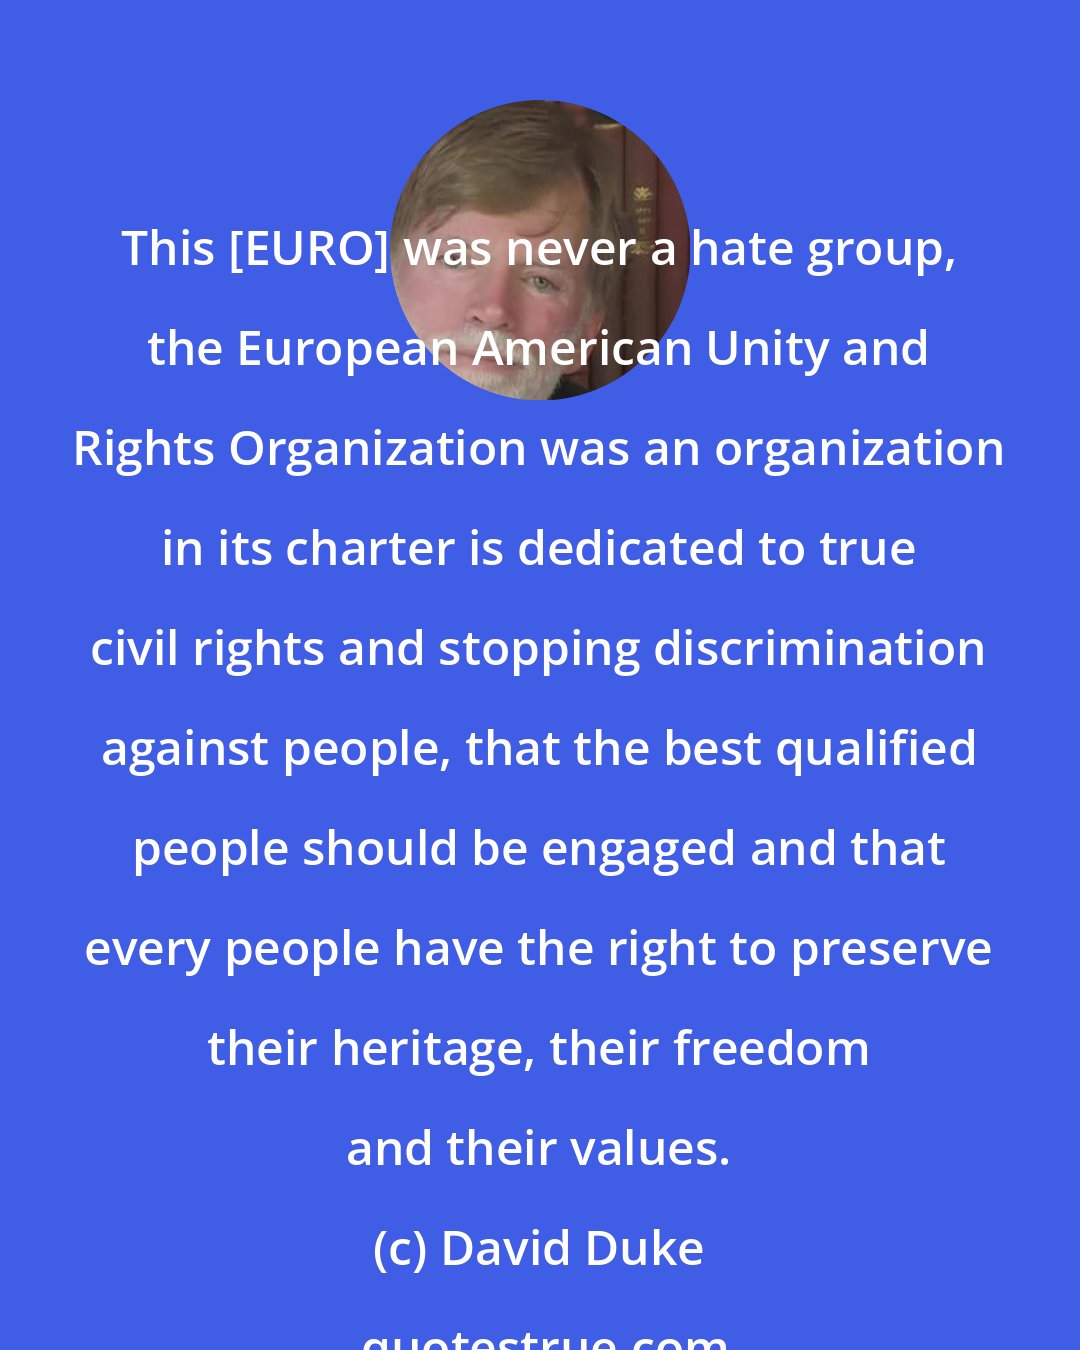 David Duke: This [EURO] was never a hate group, the European American Unity and Rights Organization was an organization in its charter is dedicated to true civil rights and stopping discrimination against people, that the best qualified people should be engaged and that every people have the right to preserve their heritage, their freedom and their values.